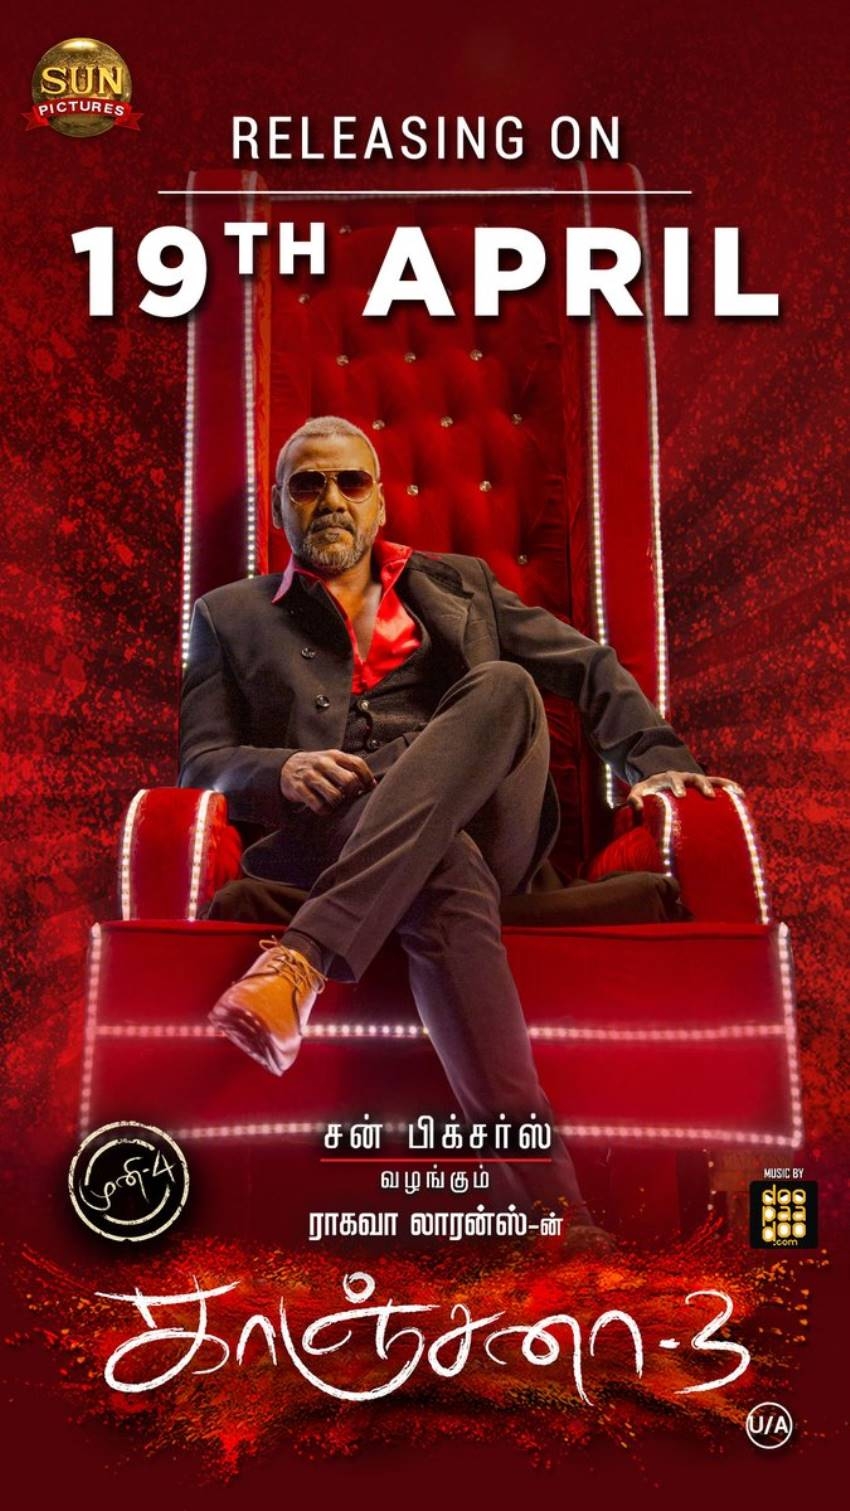 Kanchana Photos: HD Images, Pictures, Stills, First Look Posters of Kanchana  Movie - FilmiBeat